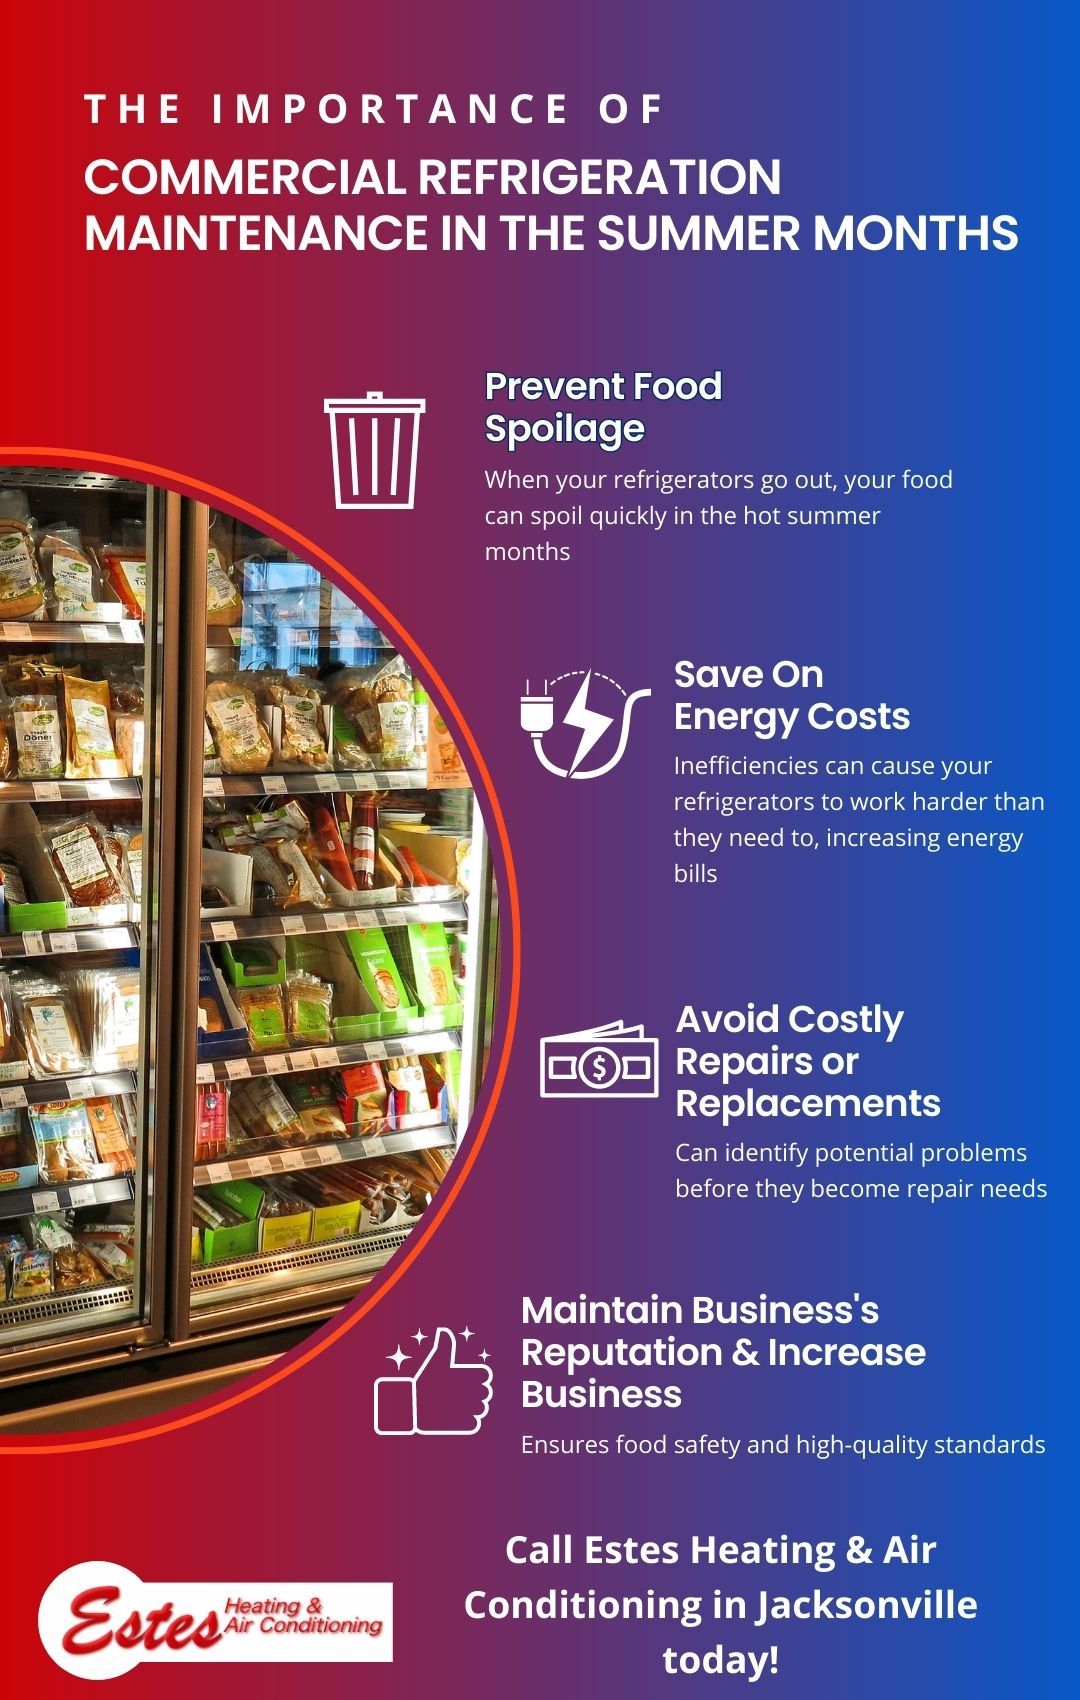 The importance of commercial refrigeration maintenance in the summer months